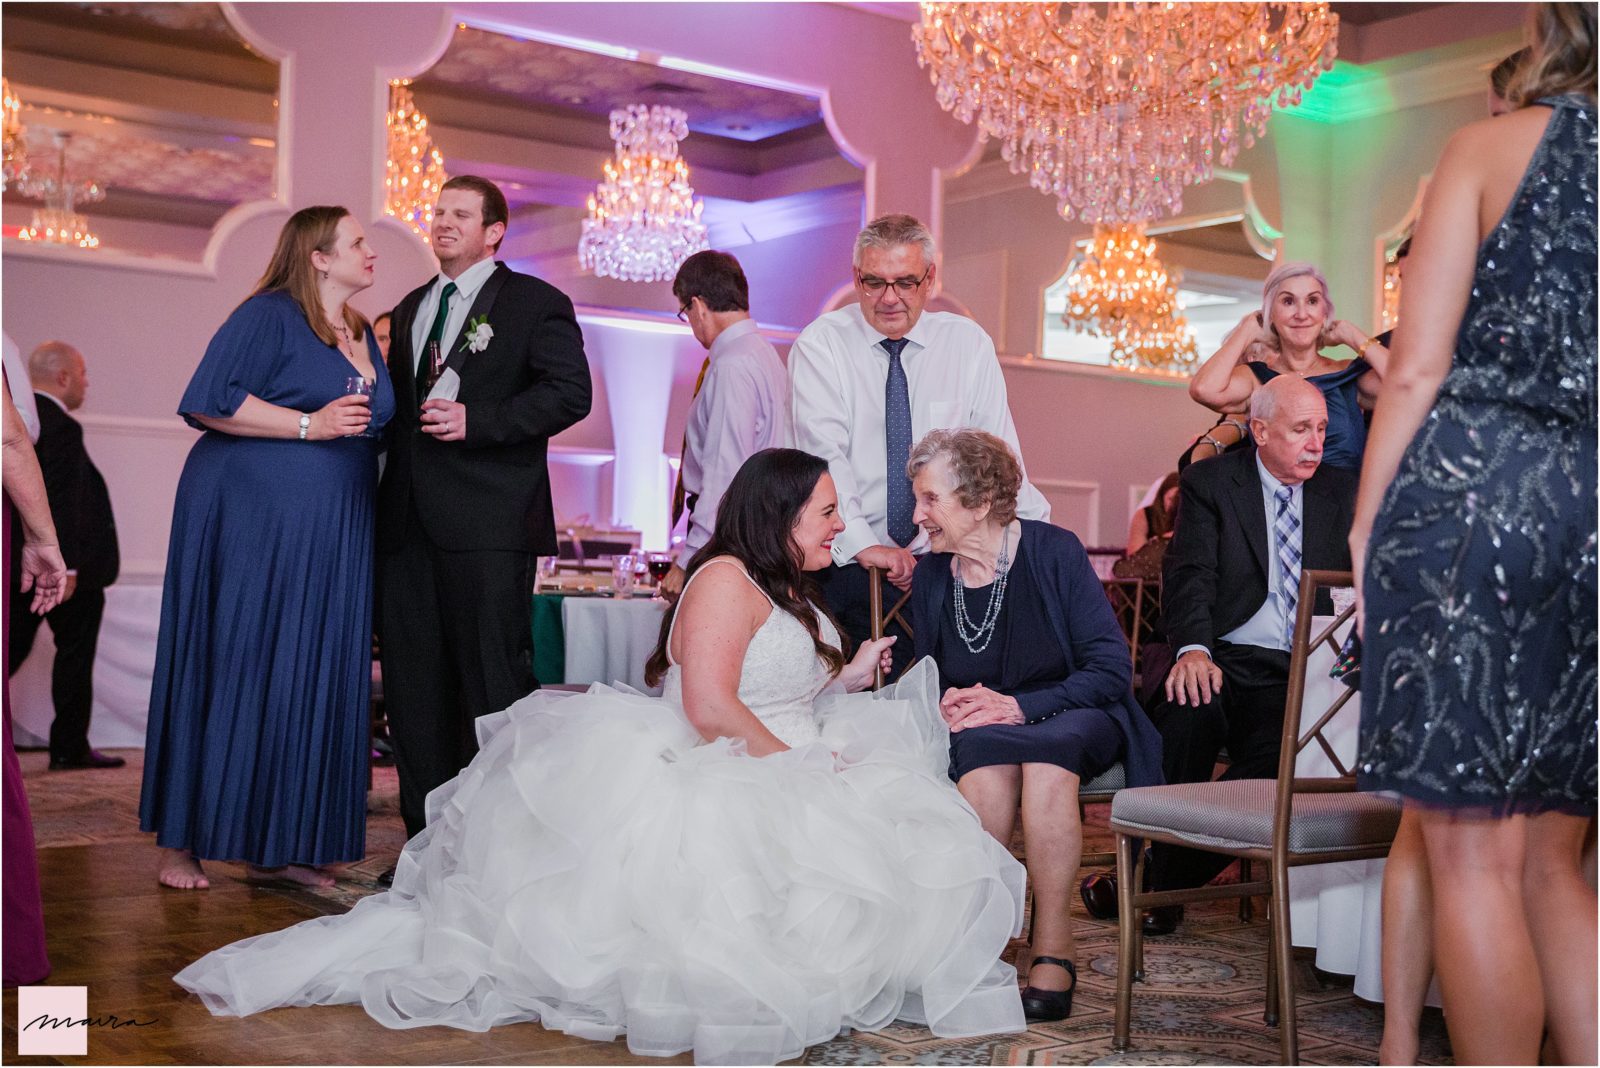 Oakbrook wedding in Drury Lane ,Venue, Reception Hall, Bride and Groom, guest family and friends